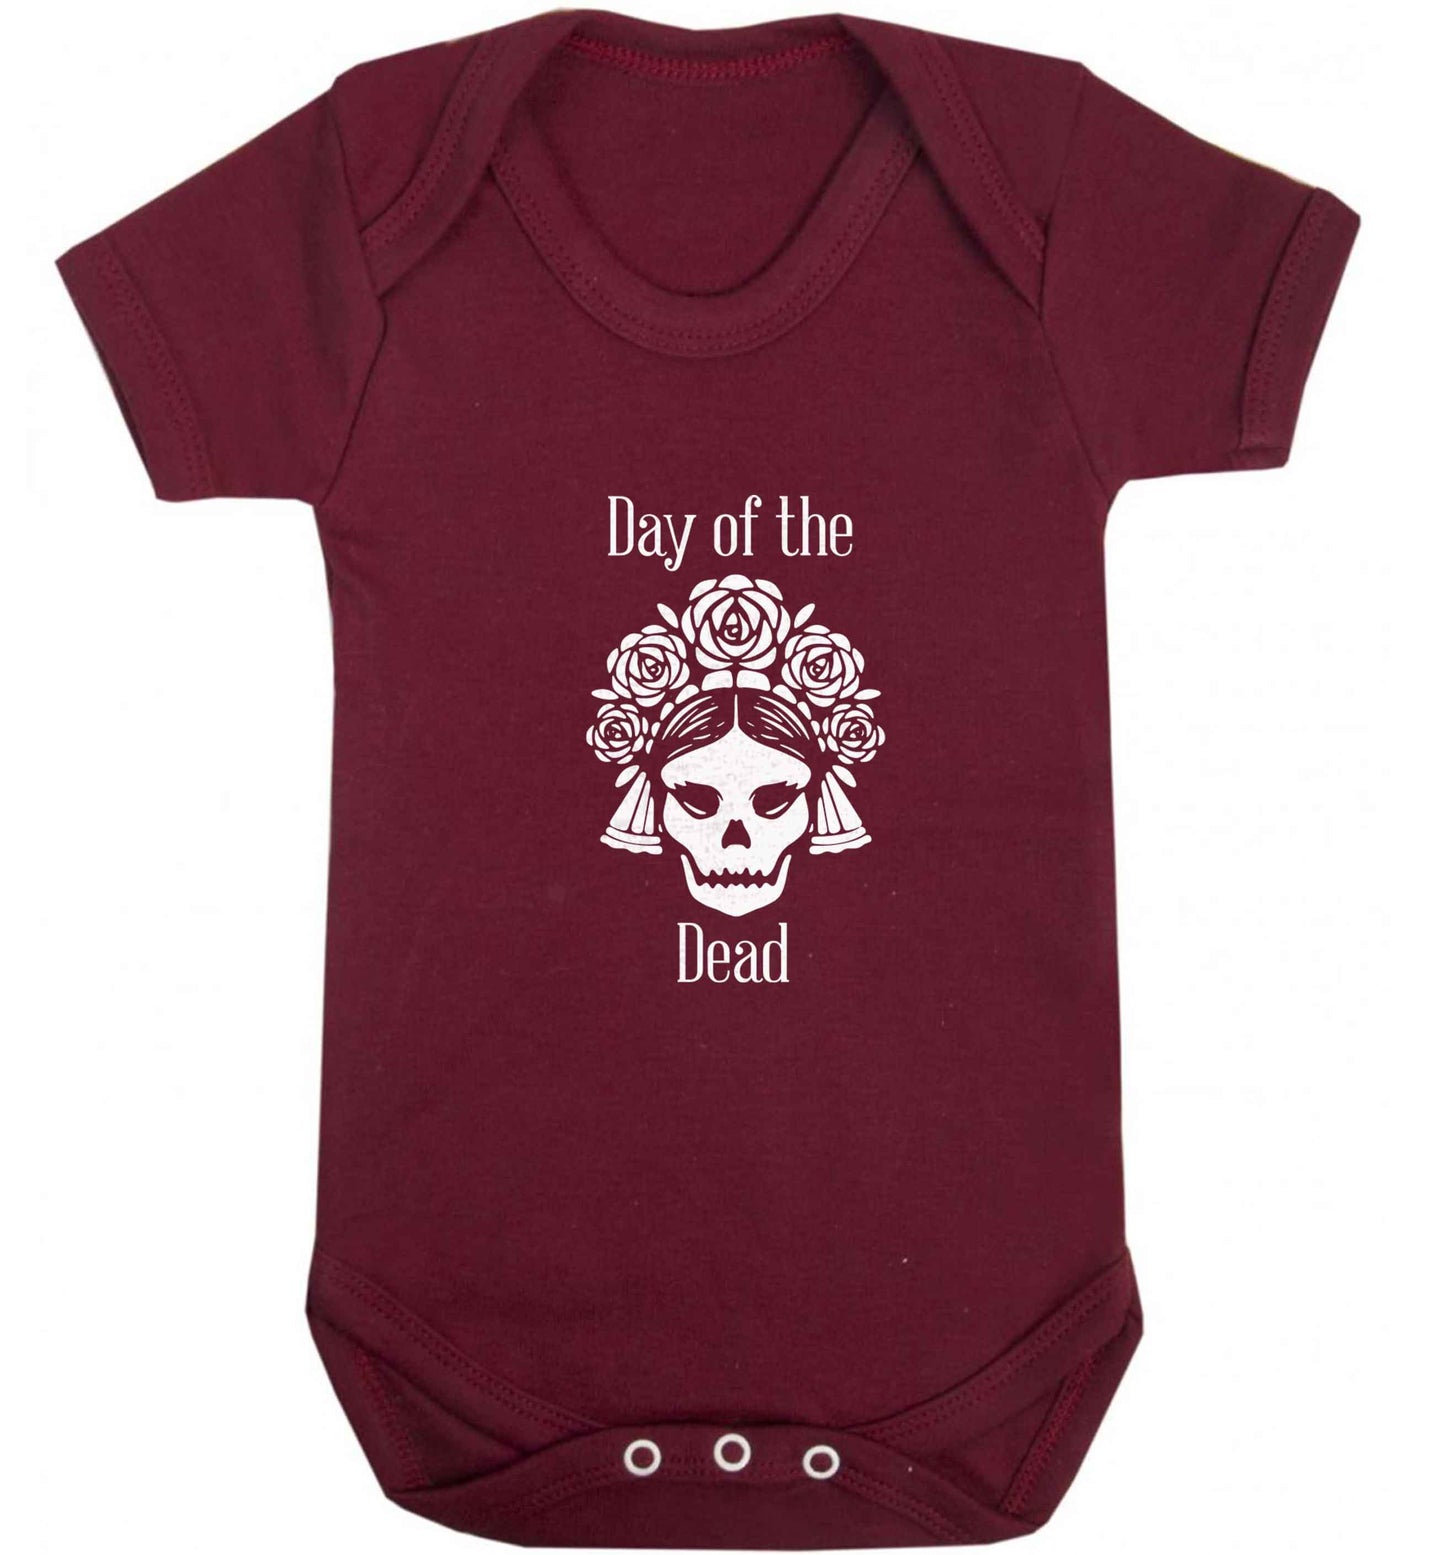 Day of the dead baby vest maroon 18-24 months